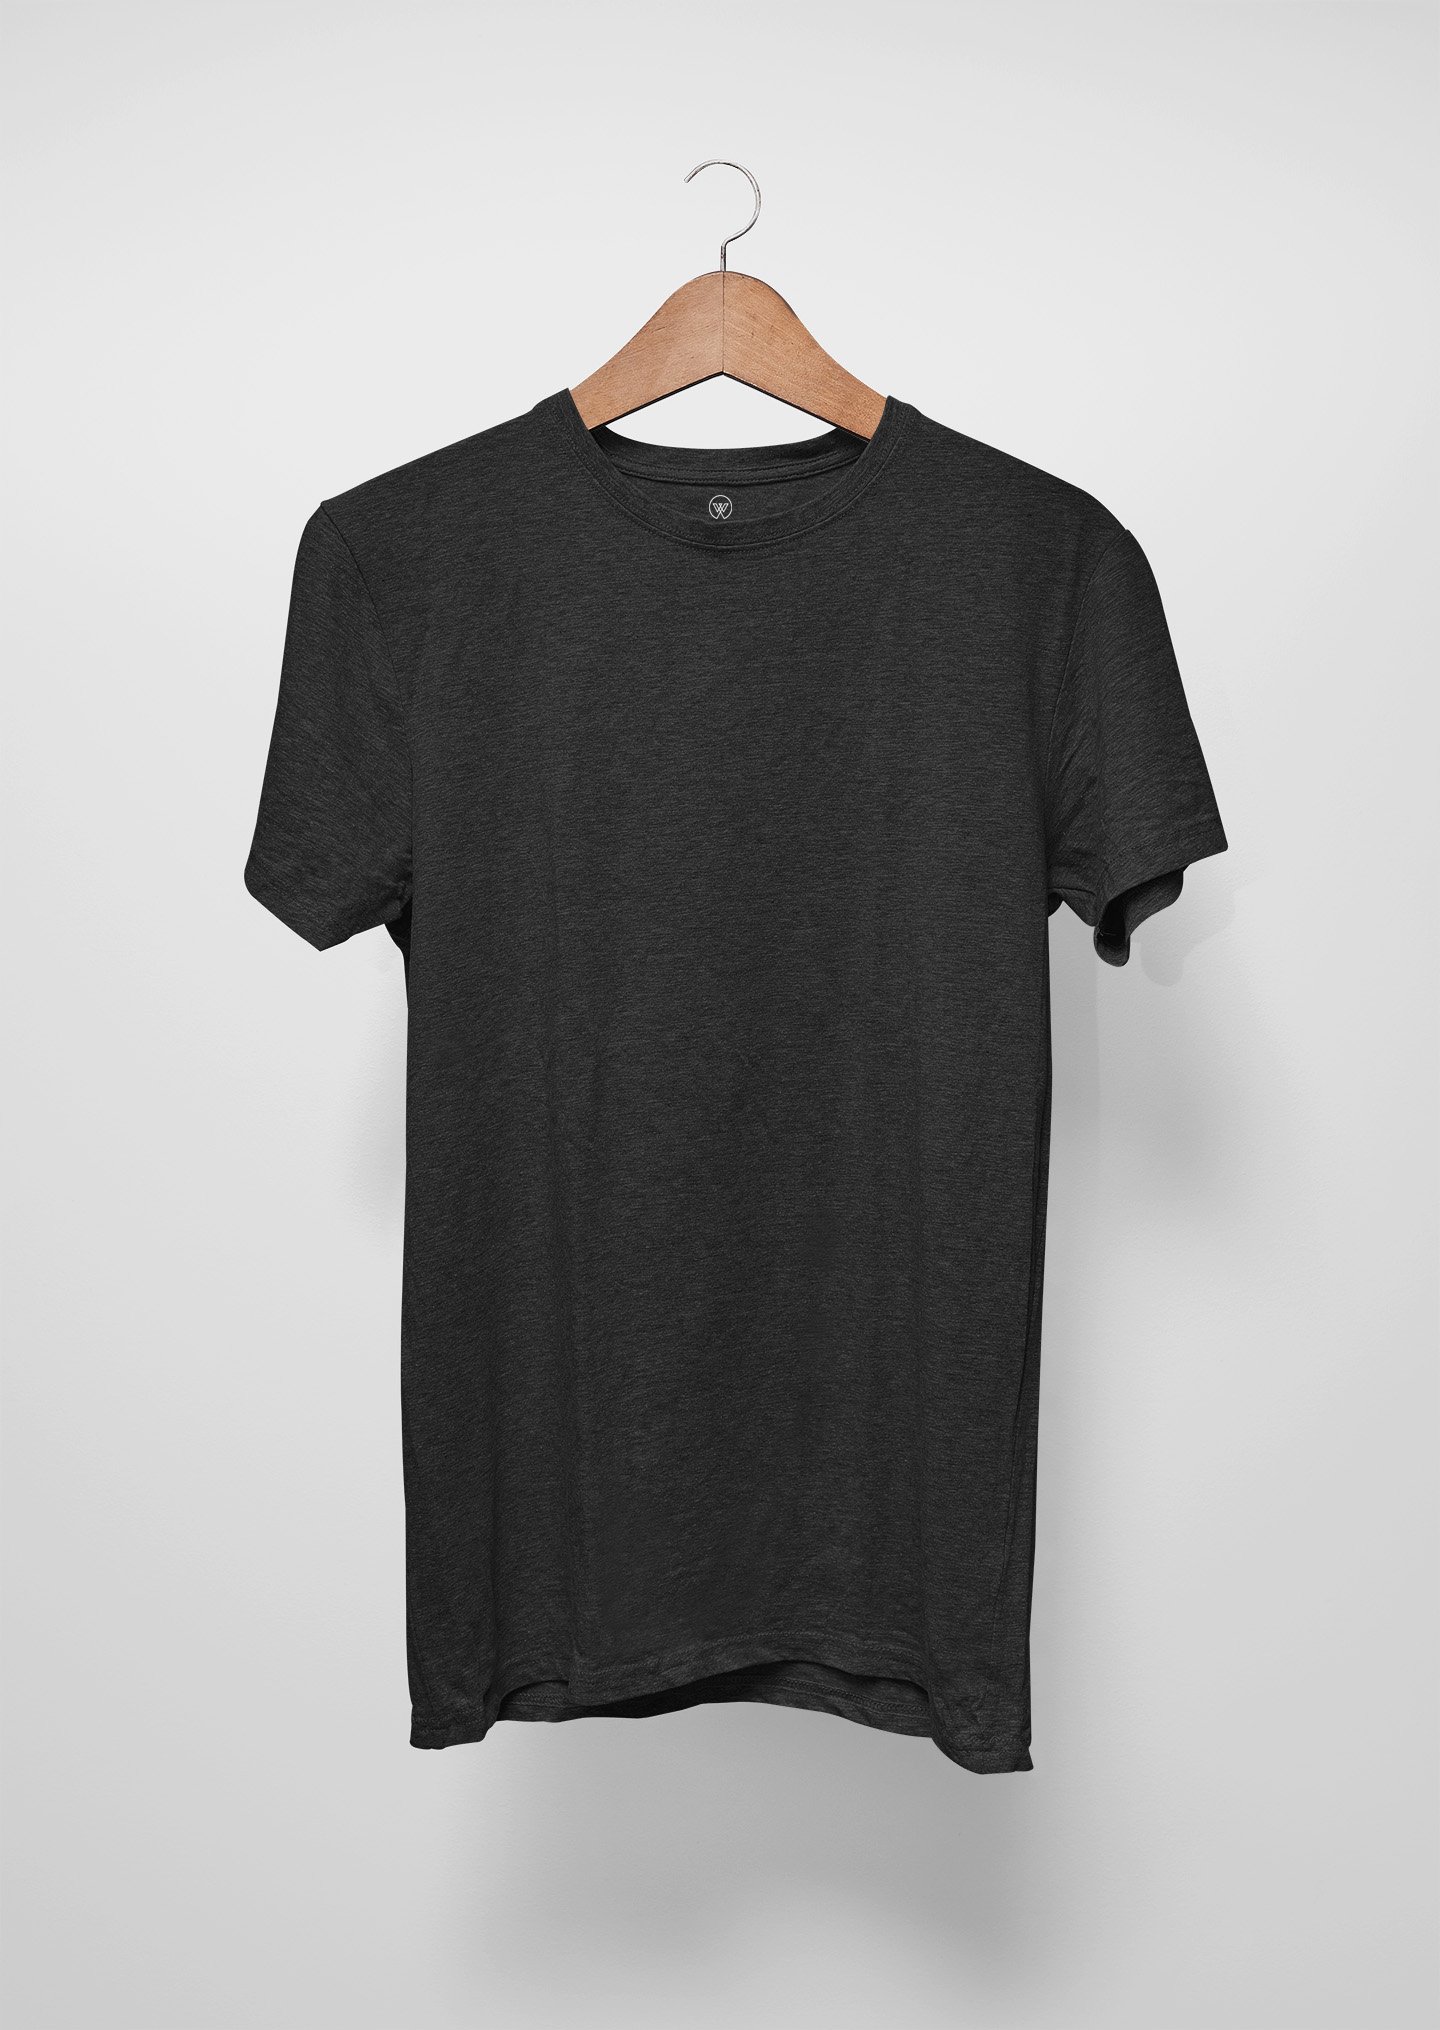 Heather Charcoal Solid T-Shirt by Wayward Wayz - front